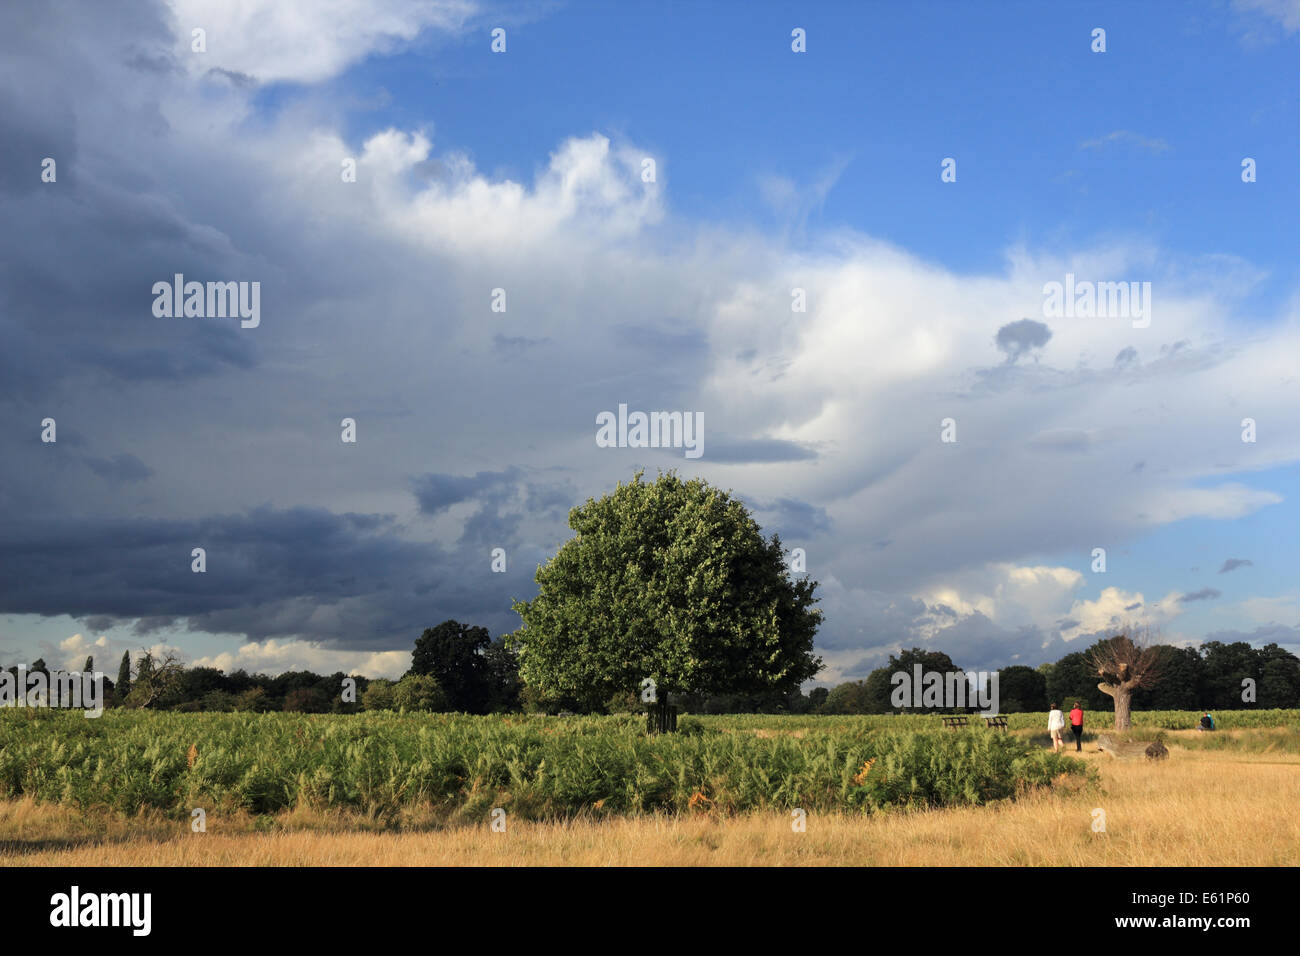 Bushy Park, SW London, UK. 11th August 2014. Weather: It was a day of sunshine and showers across the UK. Here in Bushy Park dramatic cloud formations bubbled up ahead of the rain. Credit:  Julia Gavin/Alamy Live News Stock Photo